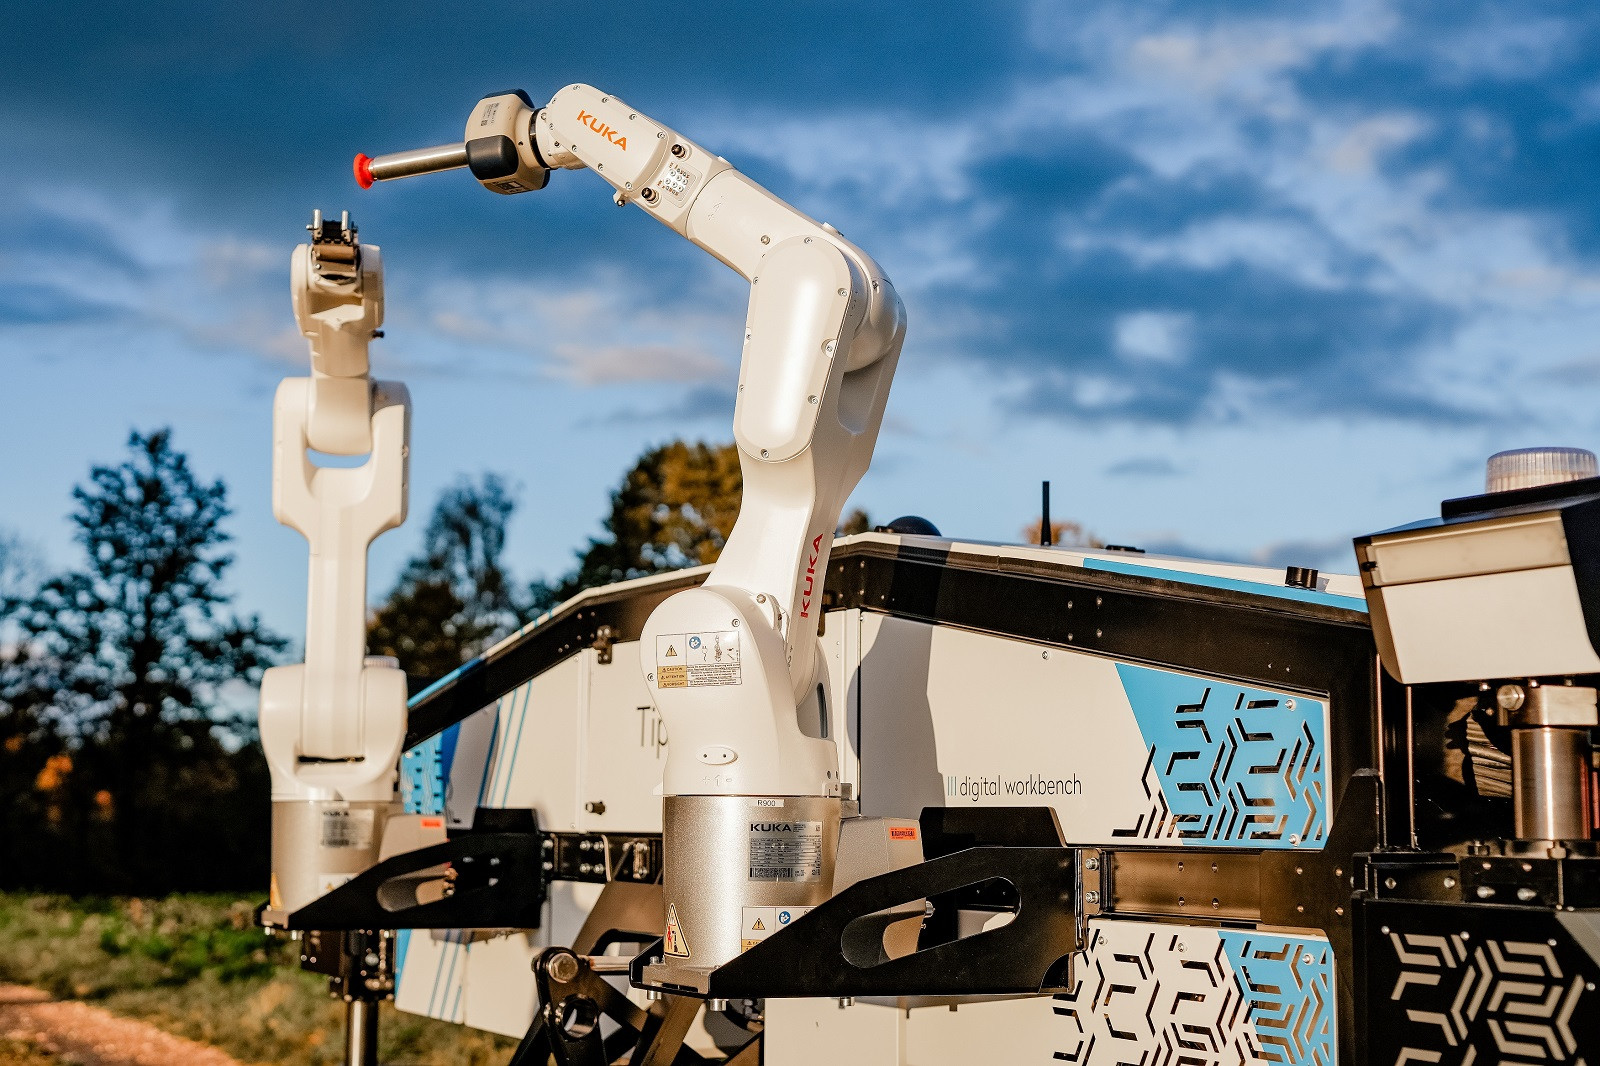 Mobile Robots are Helping Farmers Harvest Apples